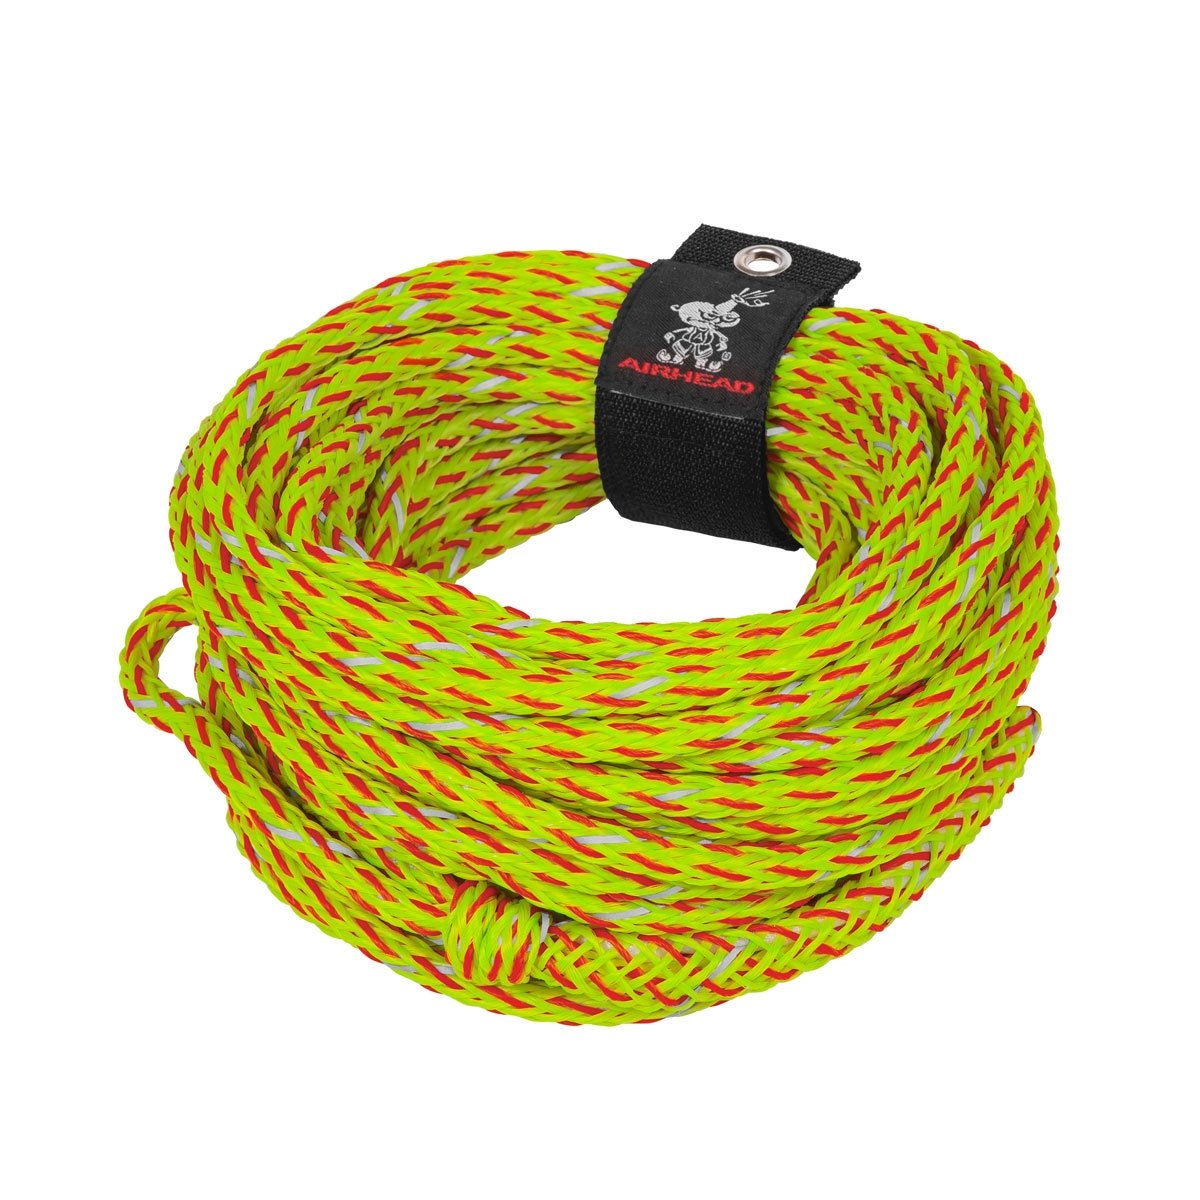 2 Rider Safety Tube Rope